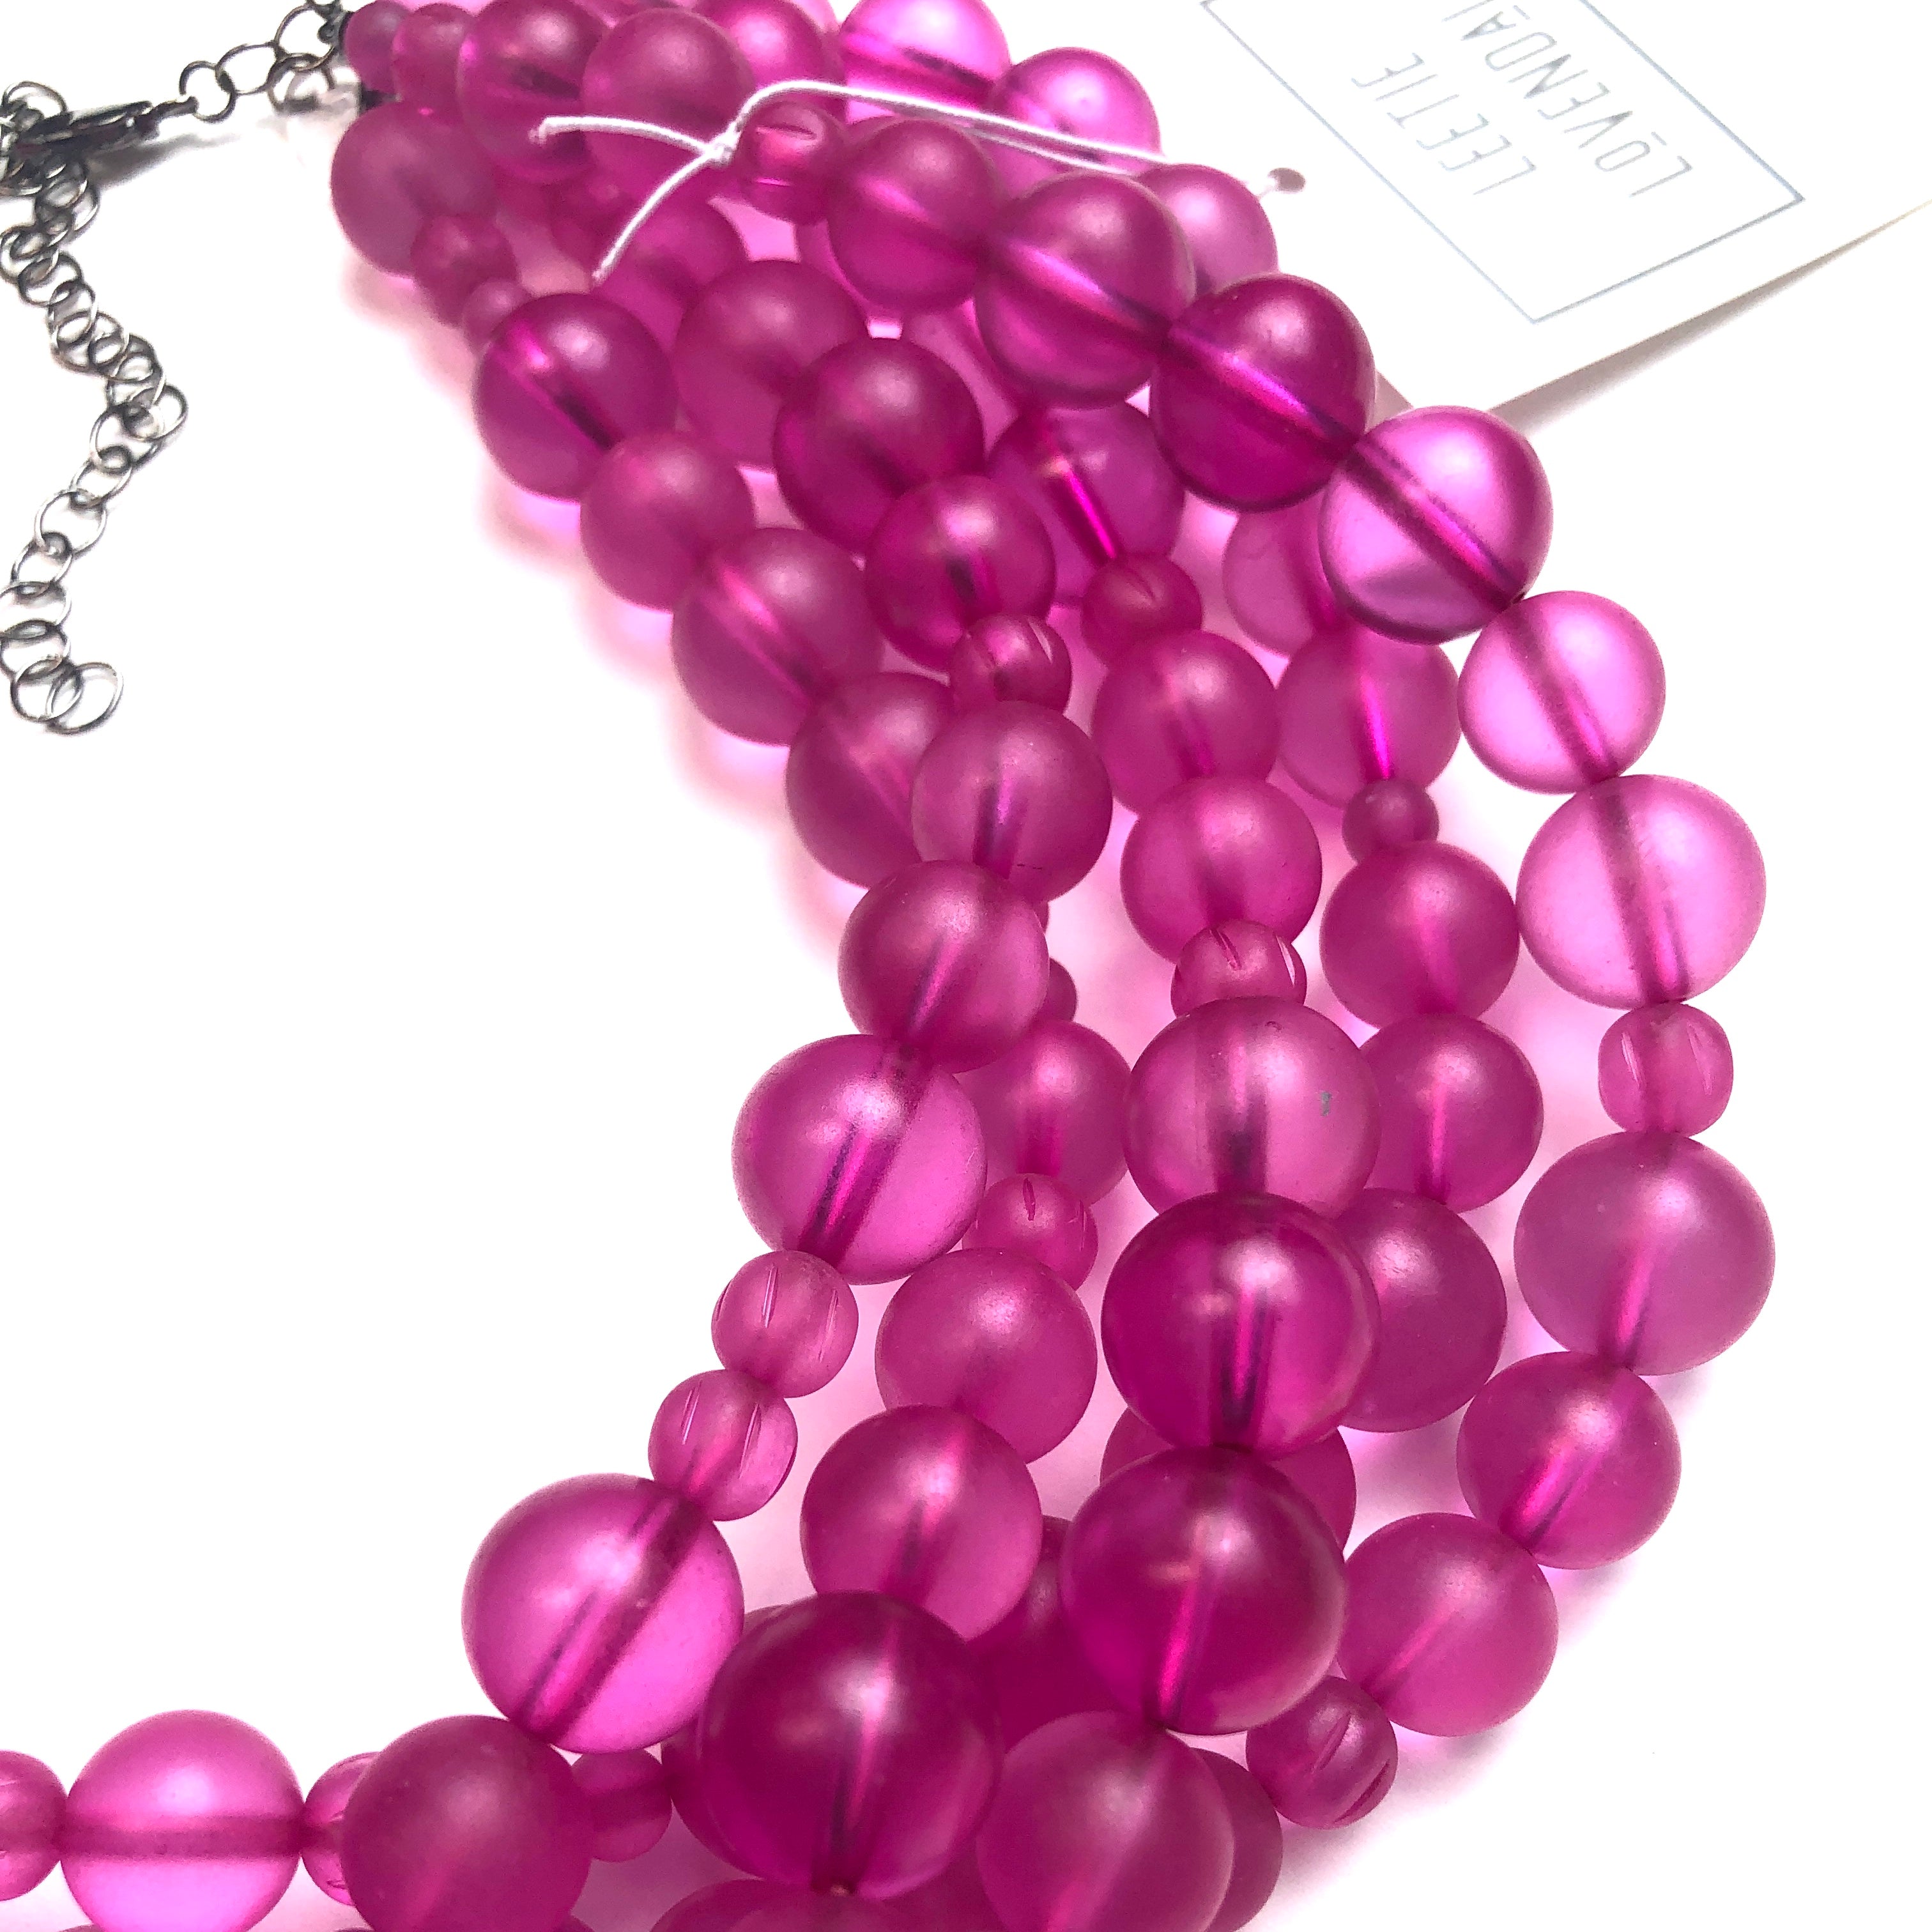 Hot Pink Frosted Sylvie Statement Necklace